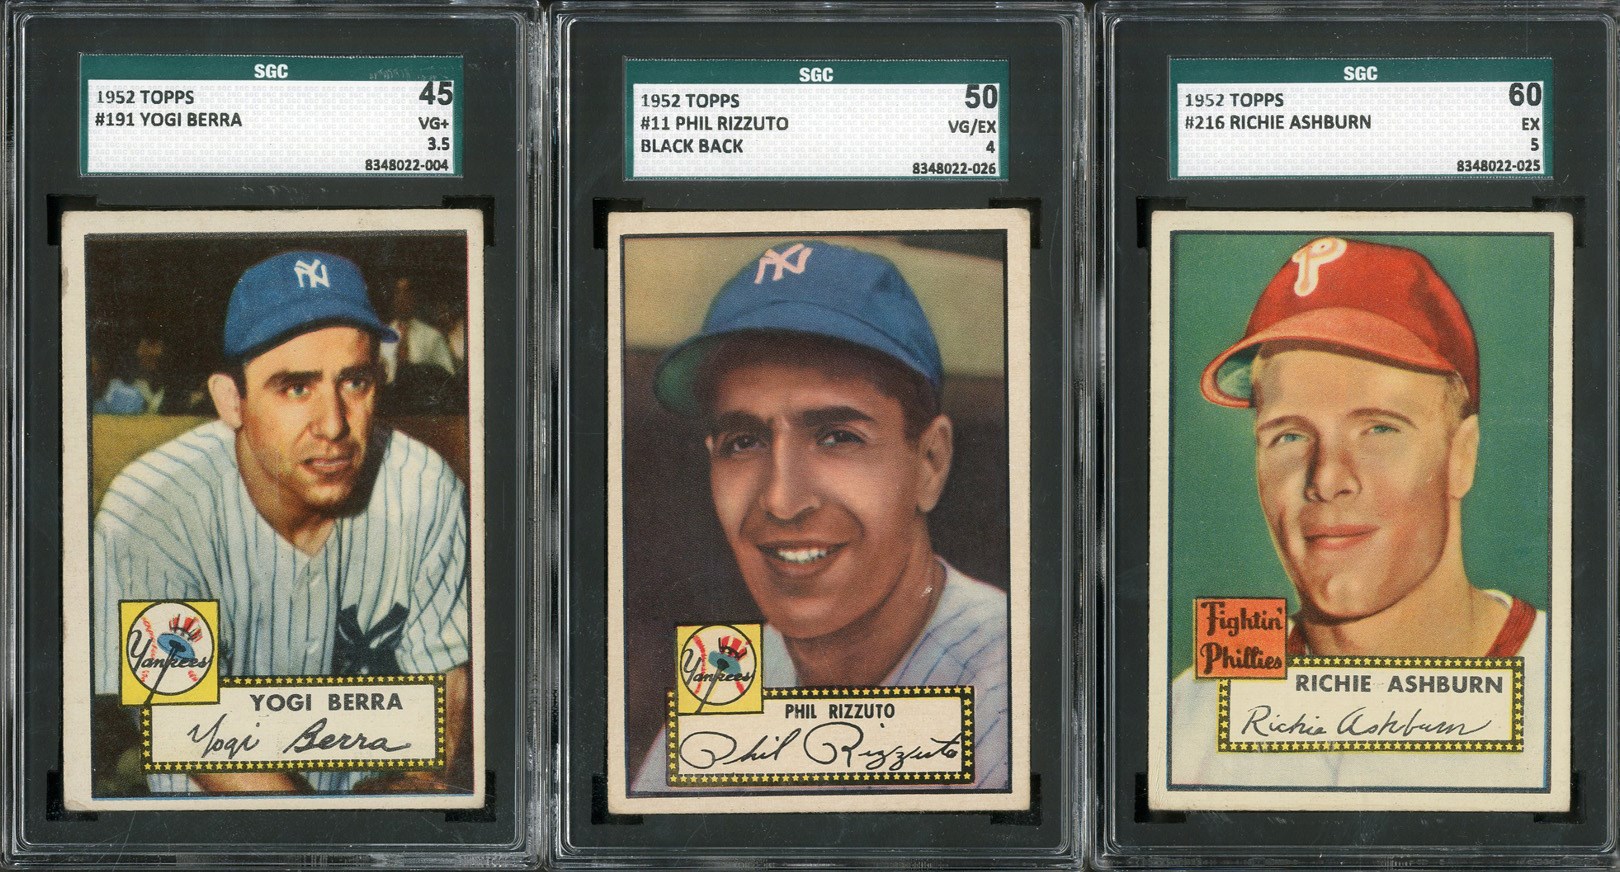 - 1952 Topps Collection of 200 Cards with 16 High Numbers with SGC Graded